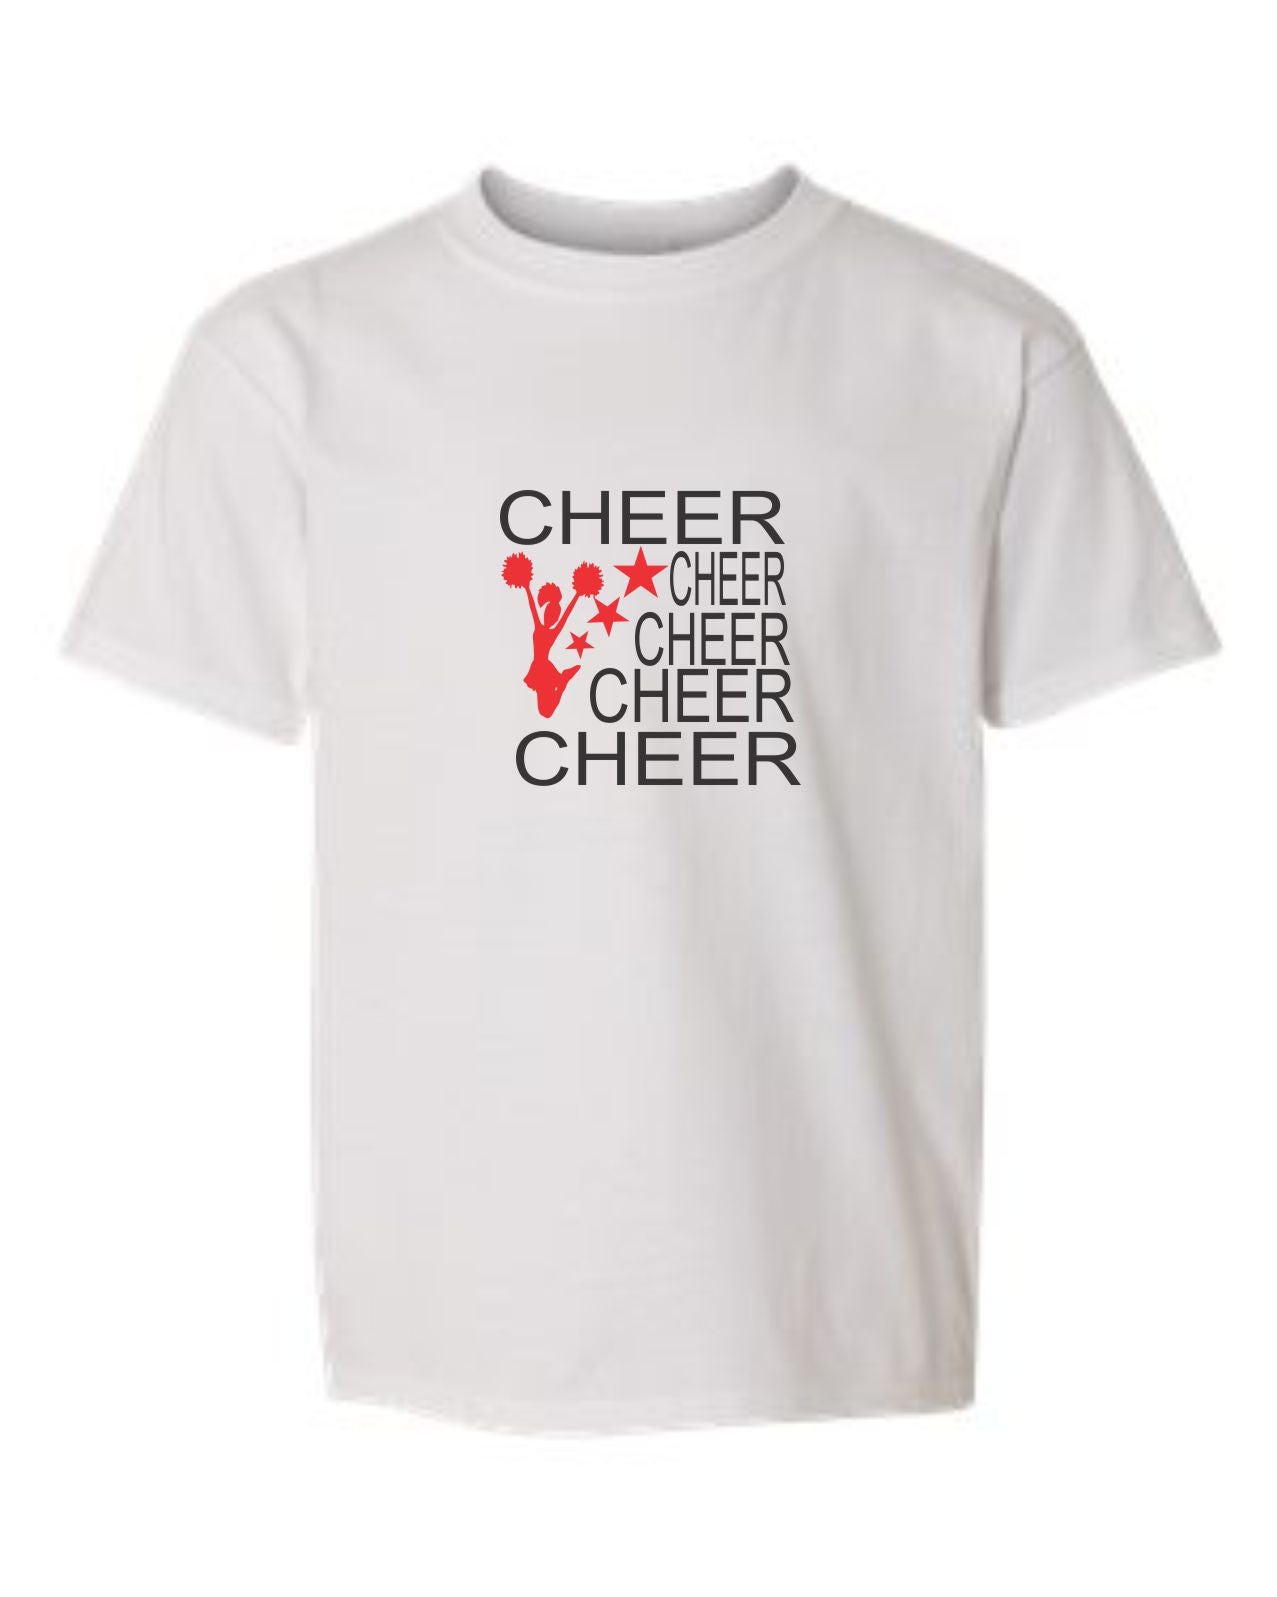 5 Cheers with Jumping Cheerleader